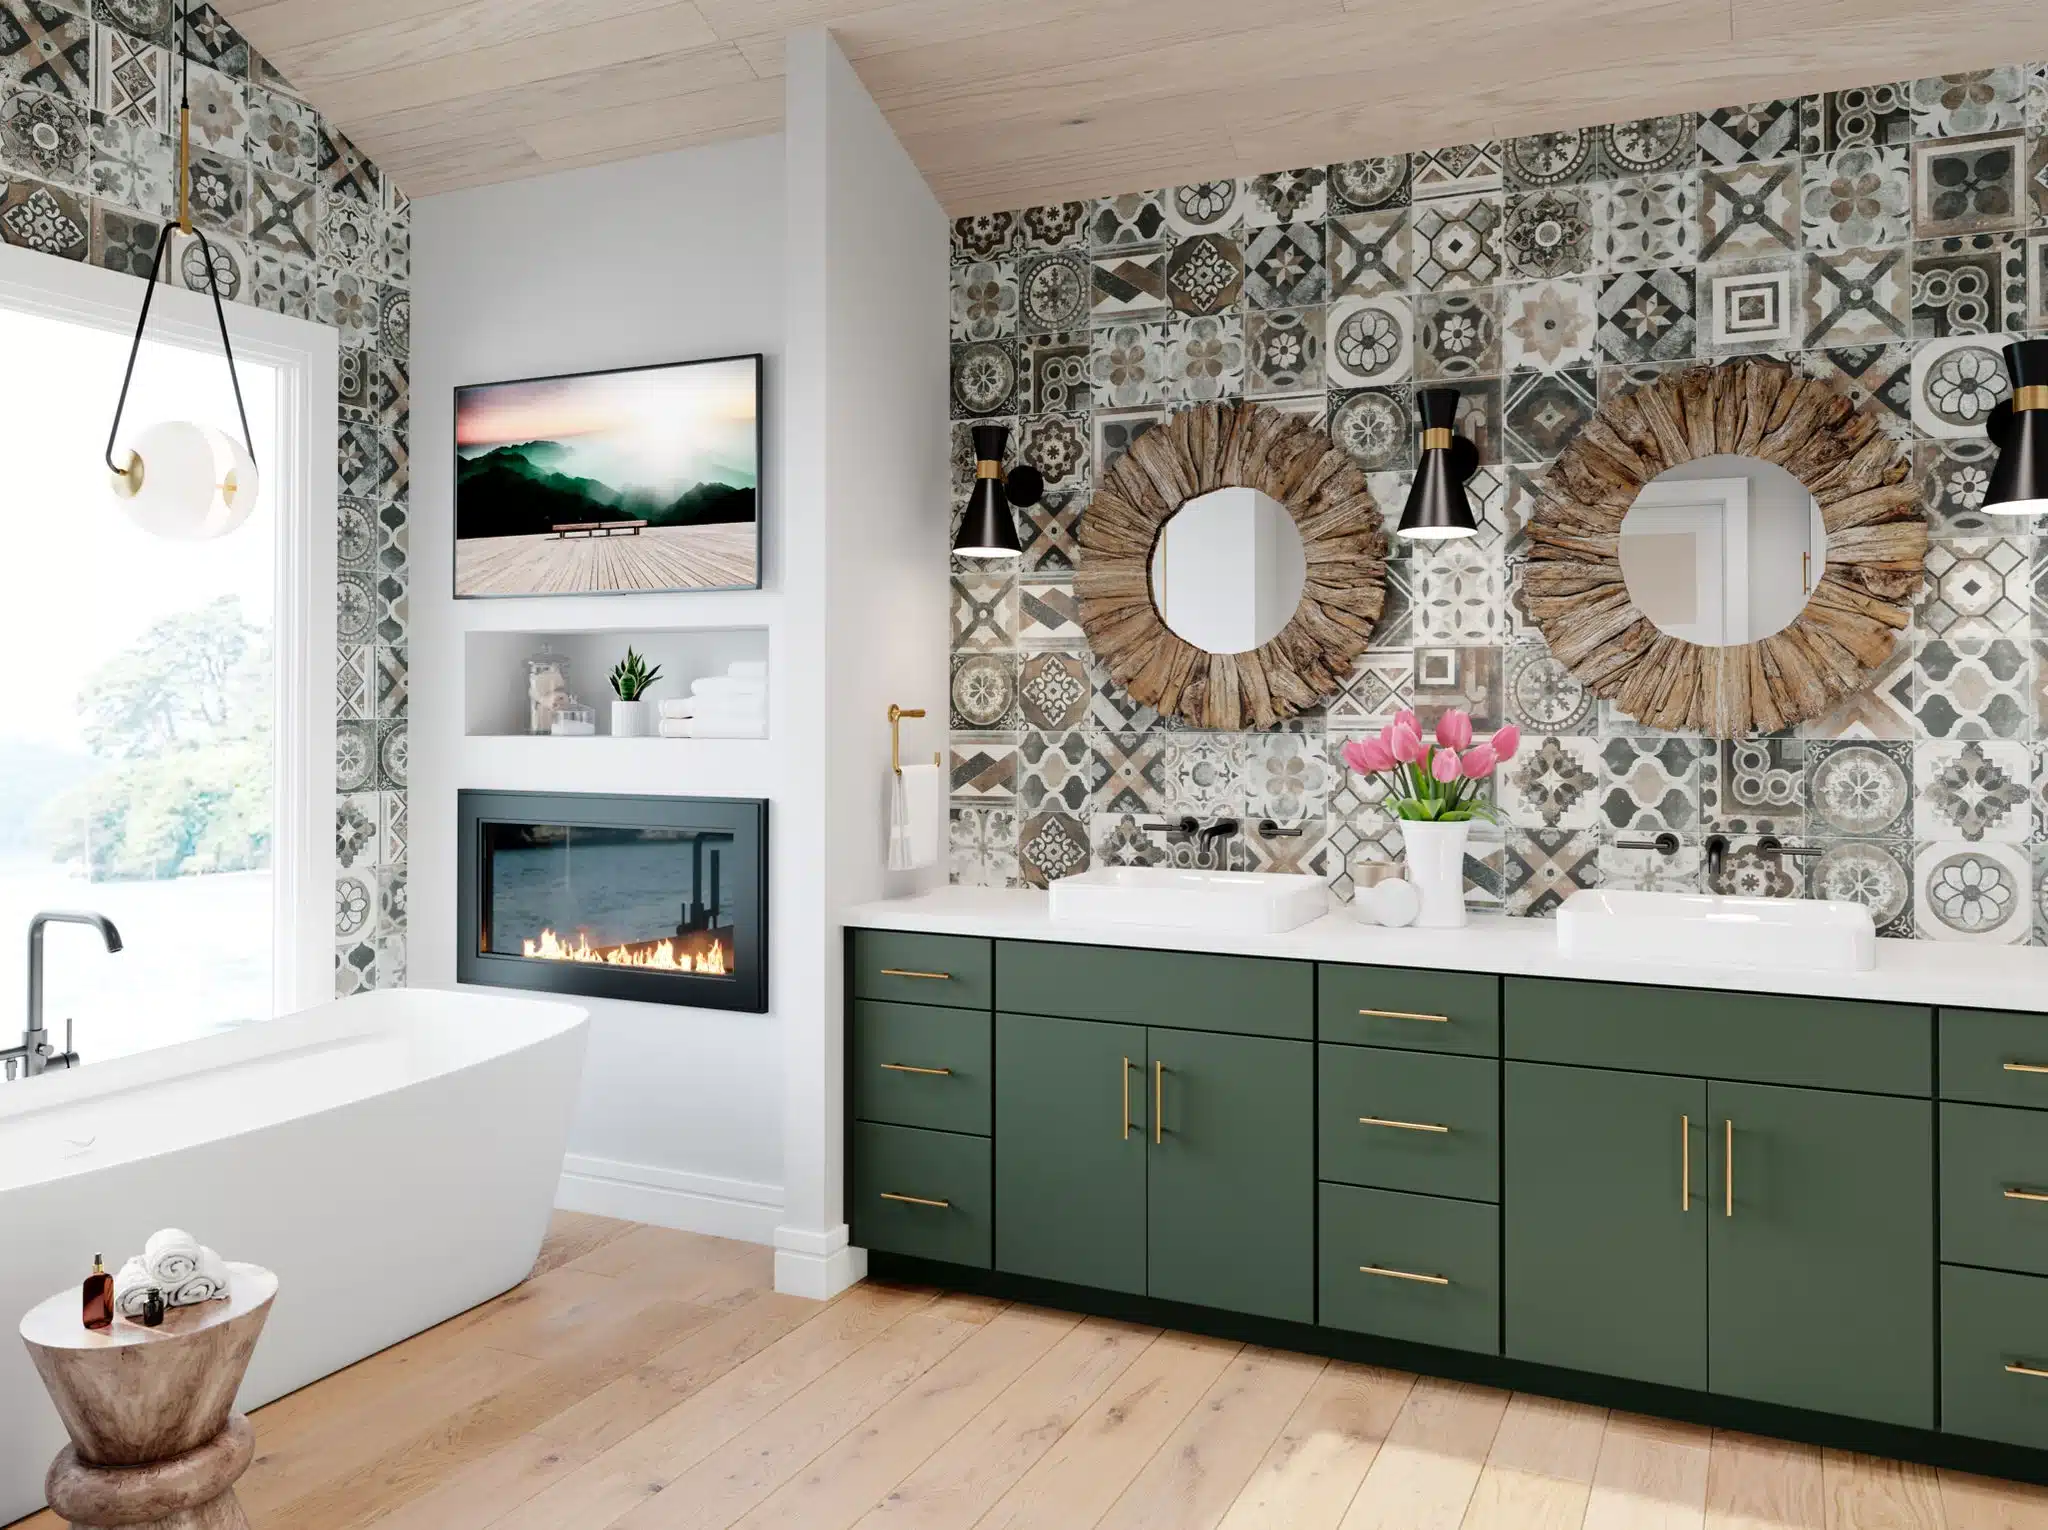 Contemporary Bathroom Cabinet Style in sage green cabinet and white countertop